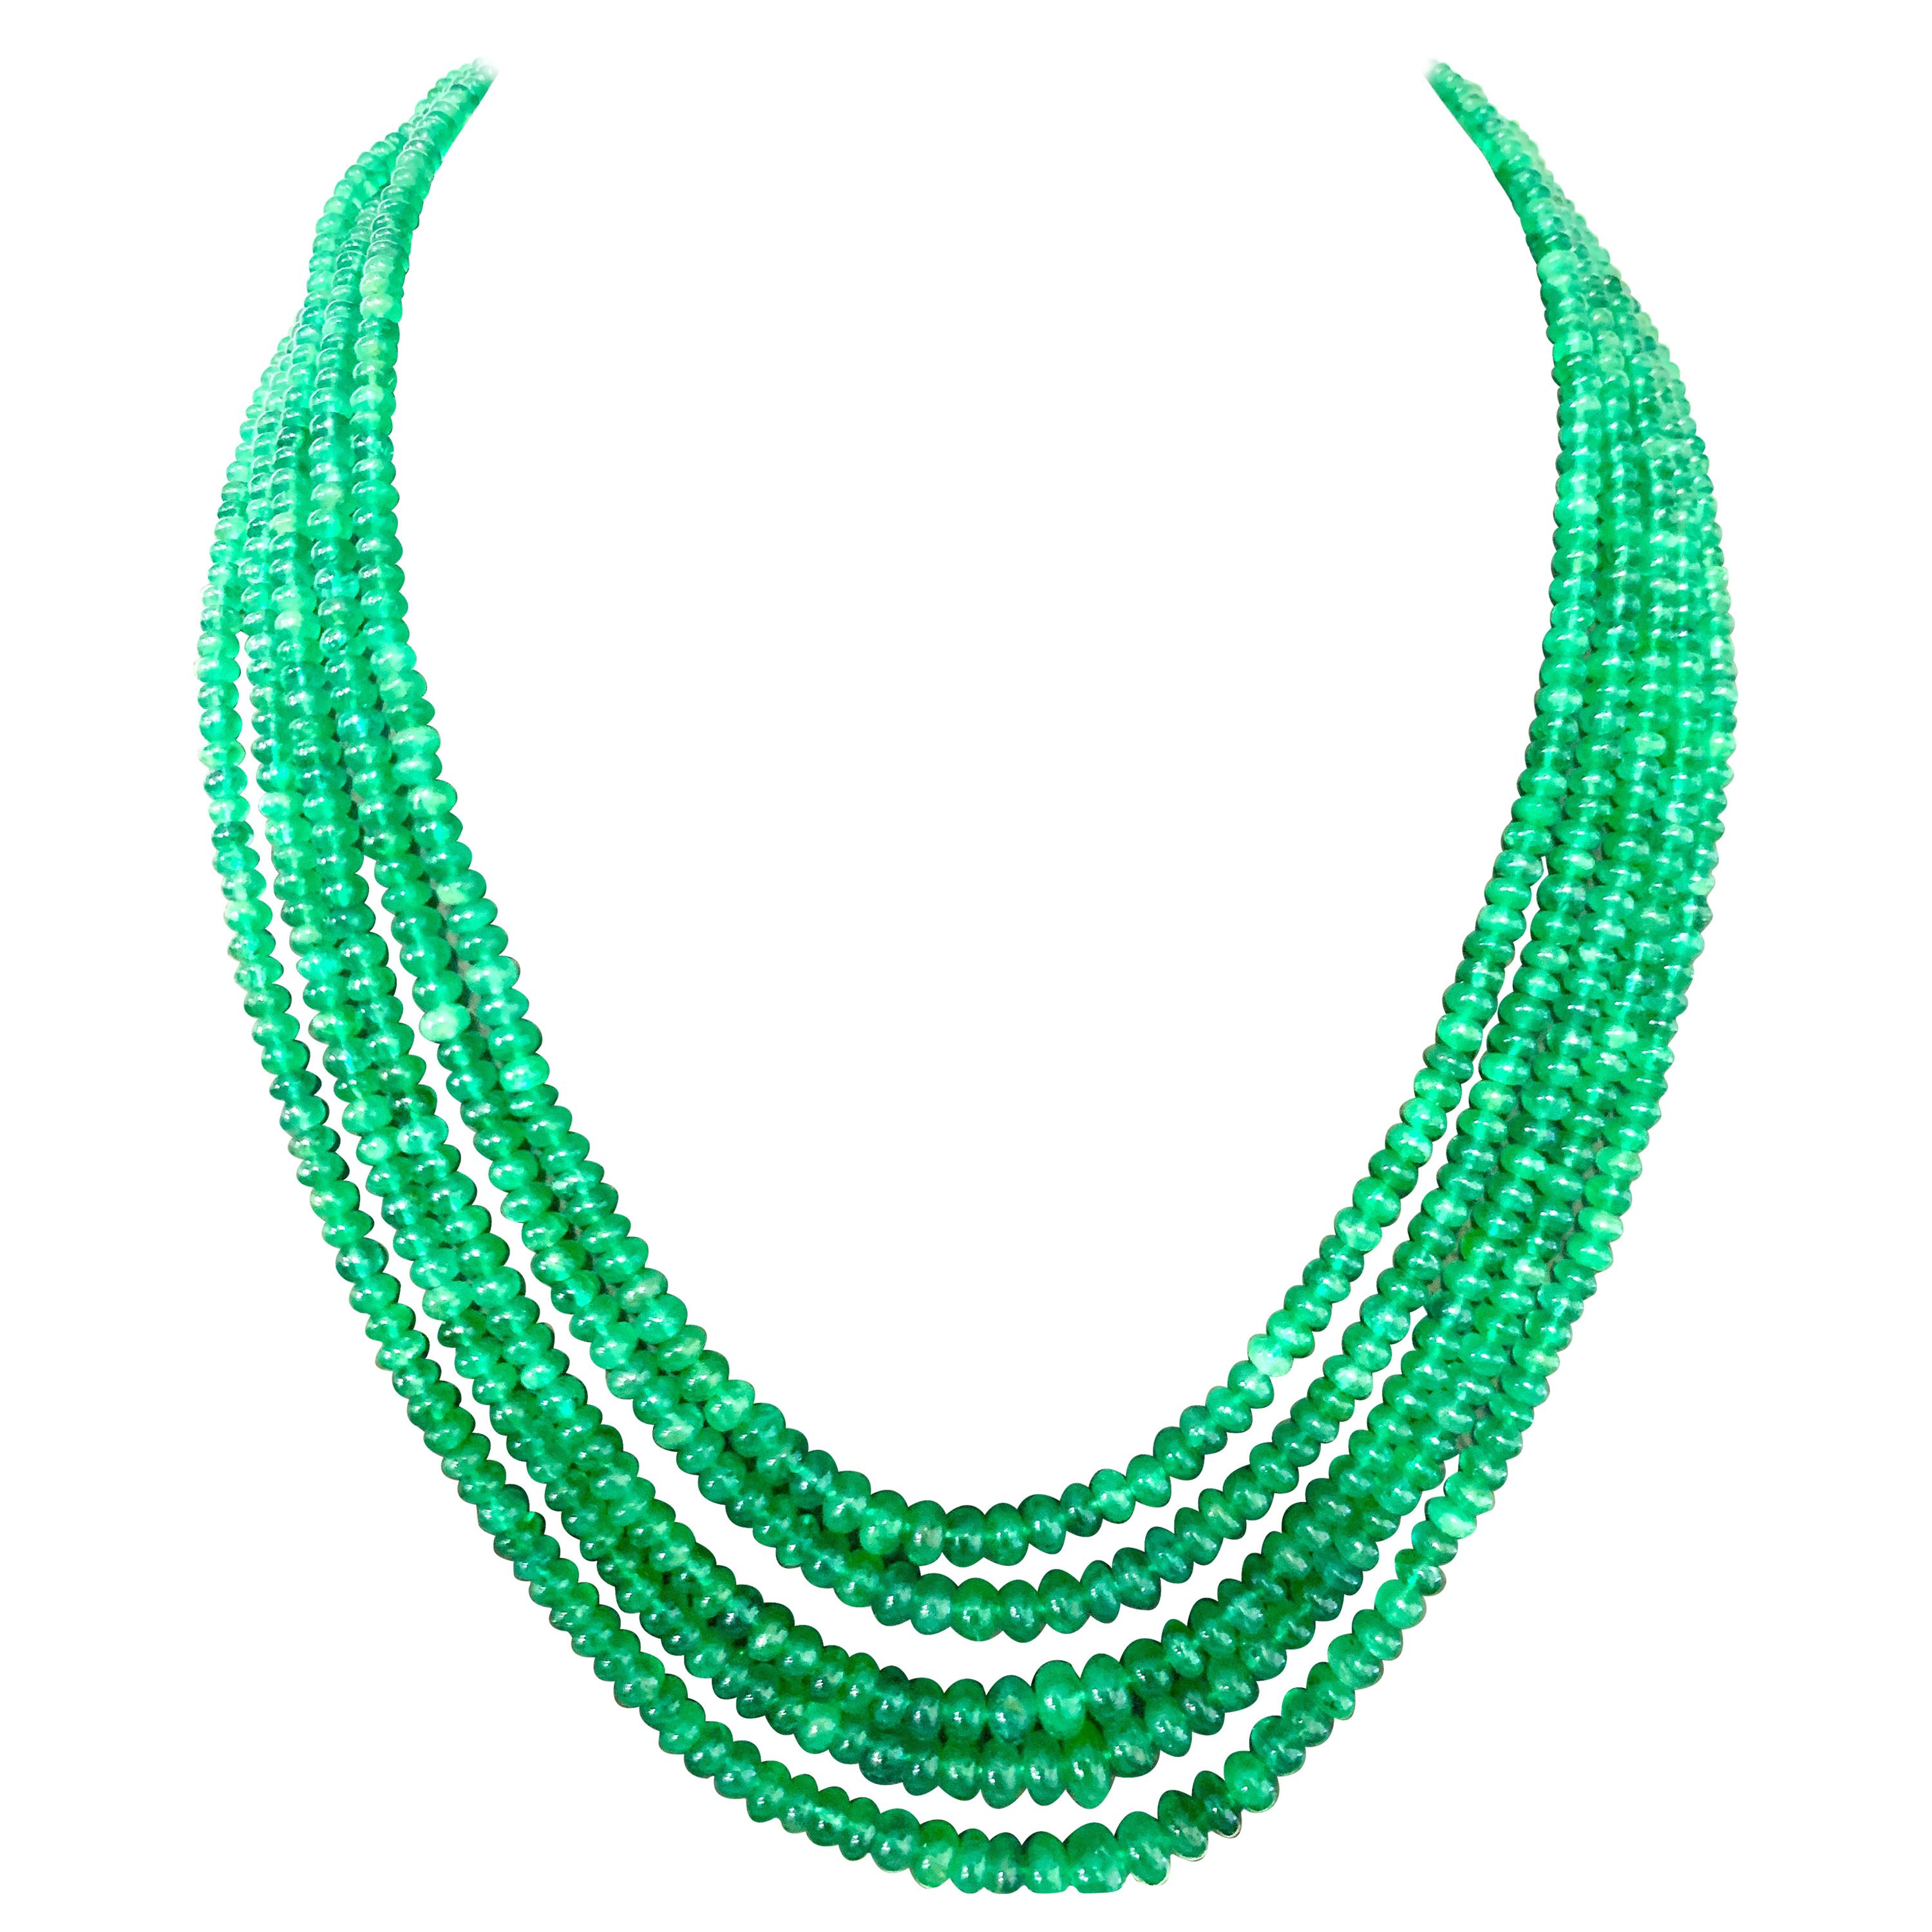 247 Carat 5 Layer Natural Brazilian Emerald Bead Necklace Sterling Silver Clasp